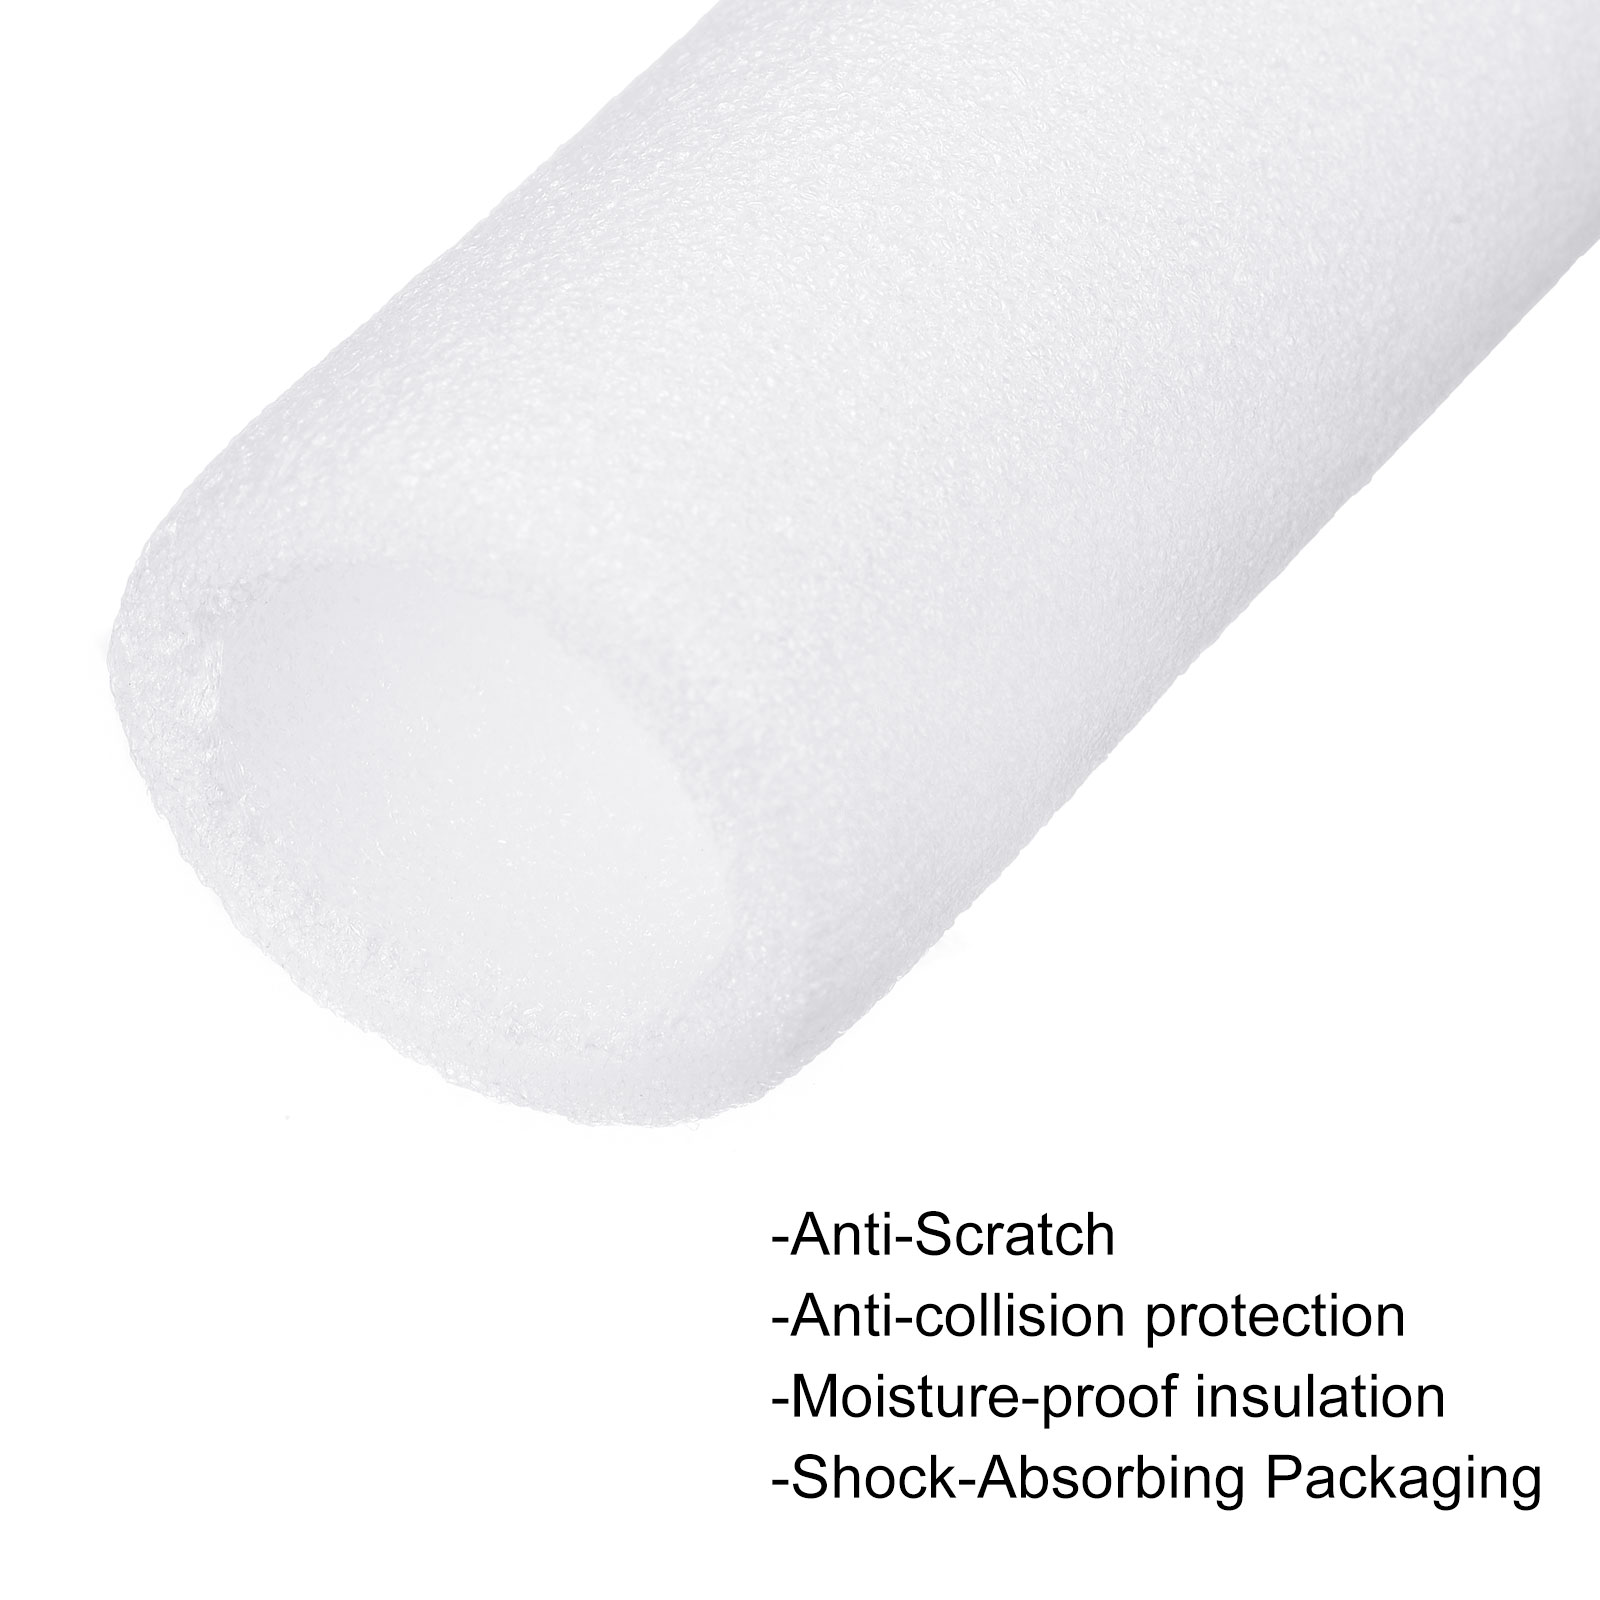 Uxcell Foam Tube Sponge Protective Sleeve Heat Preservation 22x32mm/0.9" ID 1.3" OD White for Pipe Insulation Wraps,2pcs -